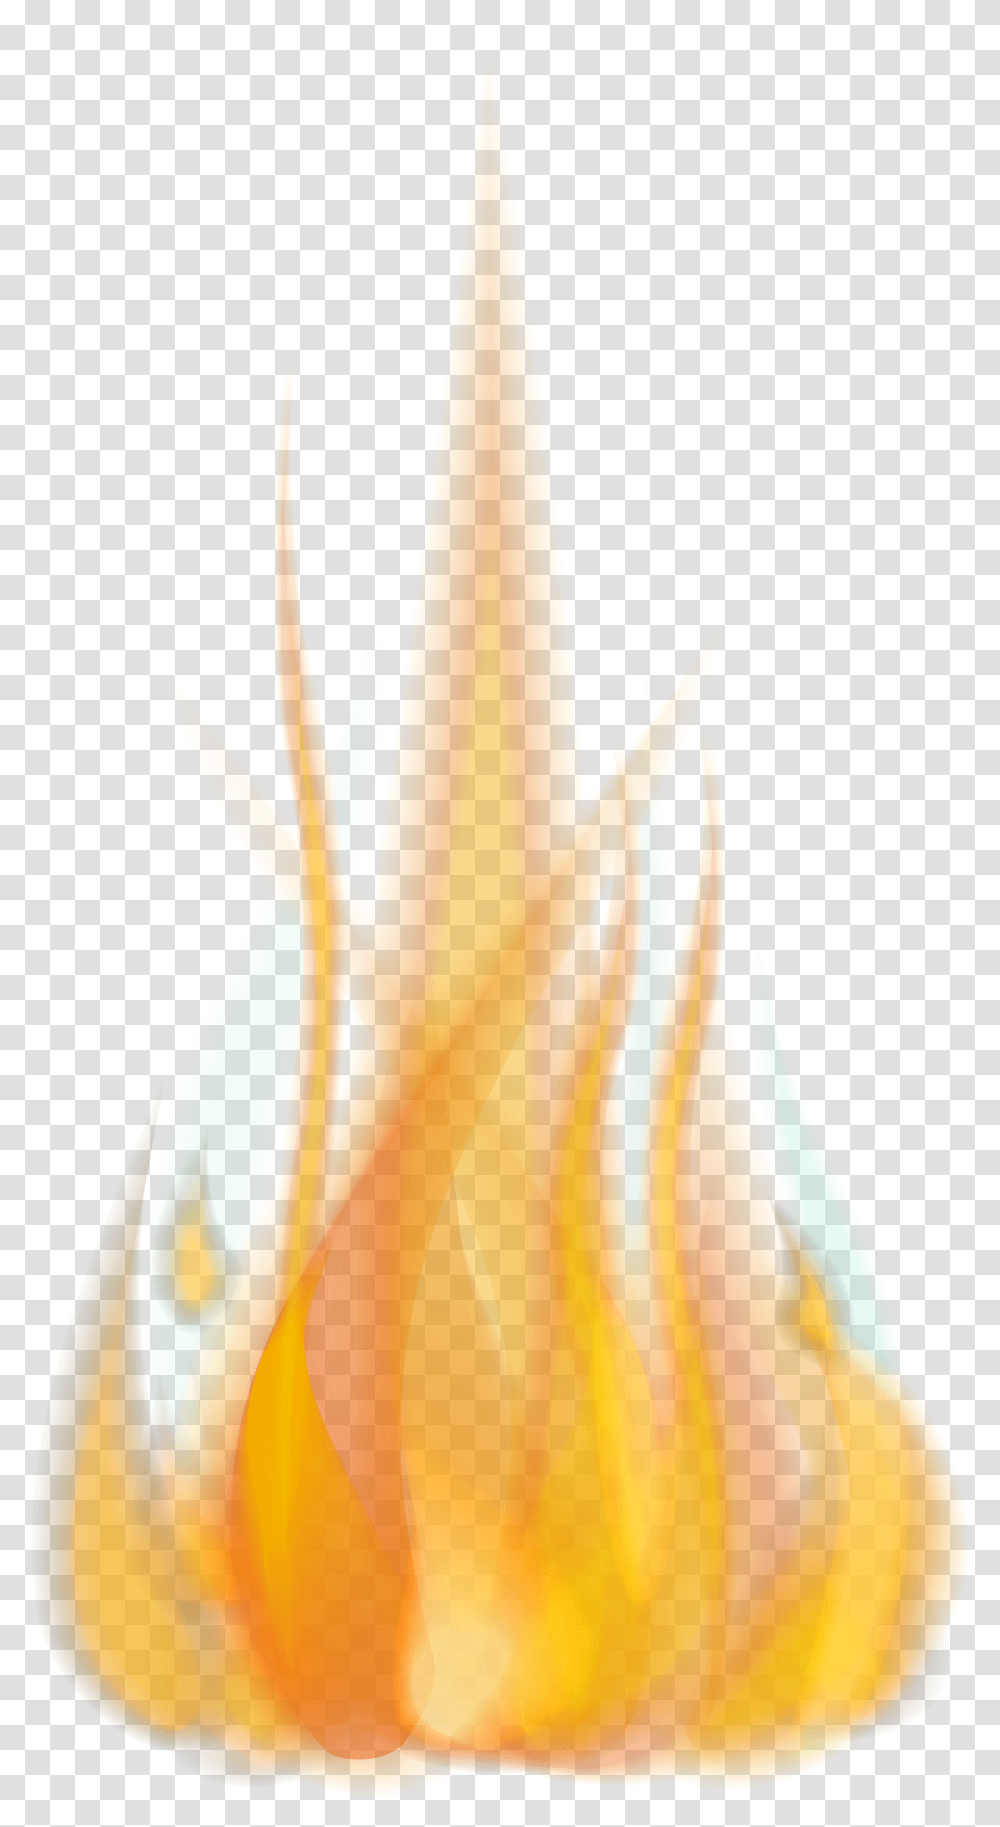 Flame Clipart Fire Flame Hd Transparent Png